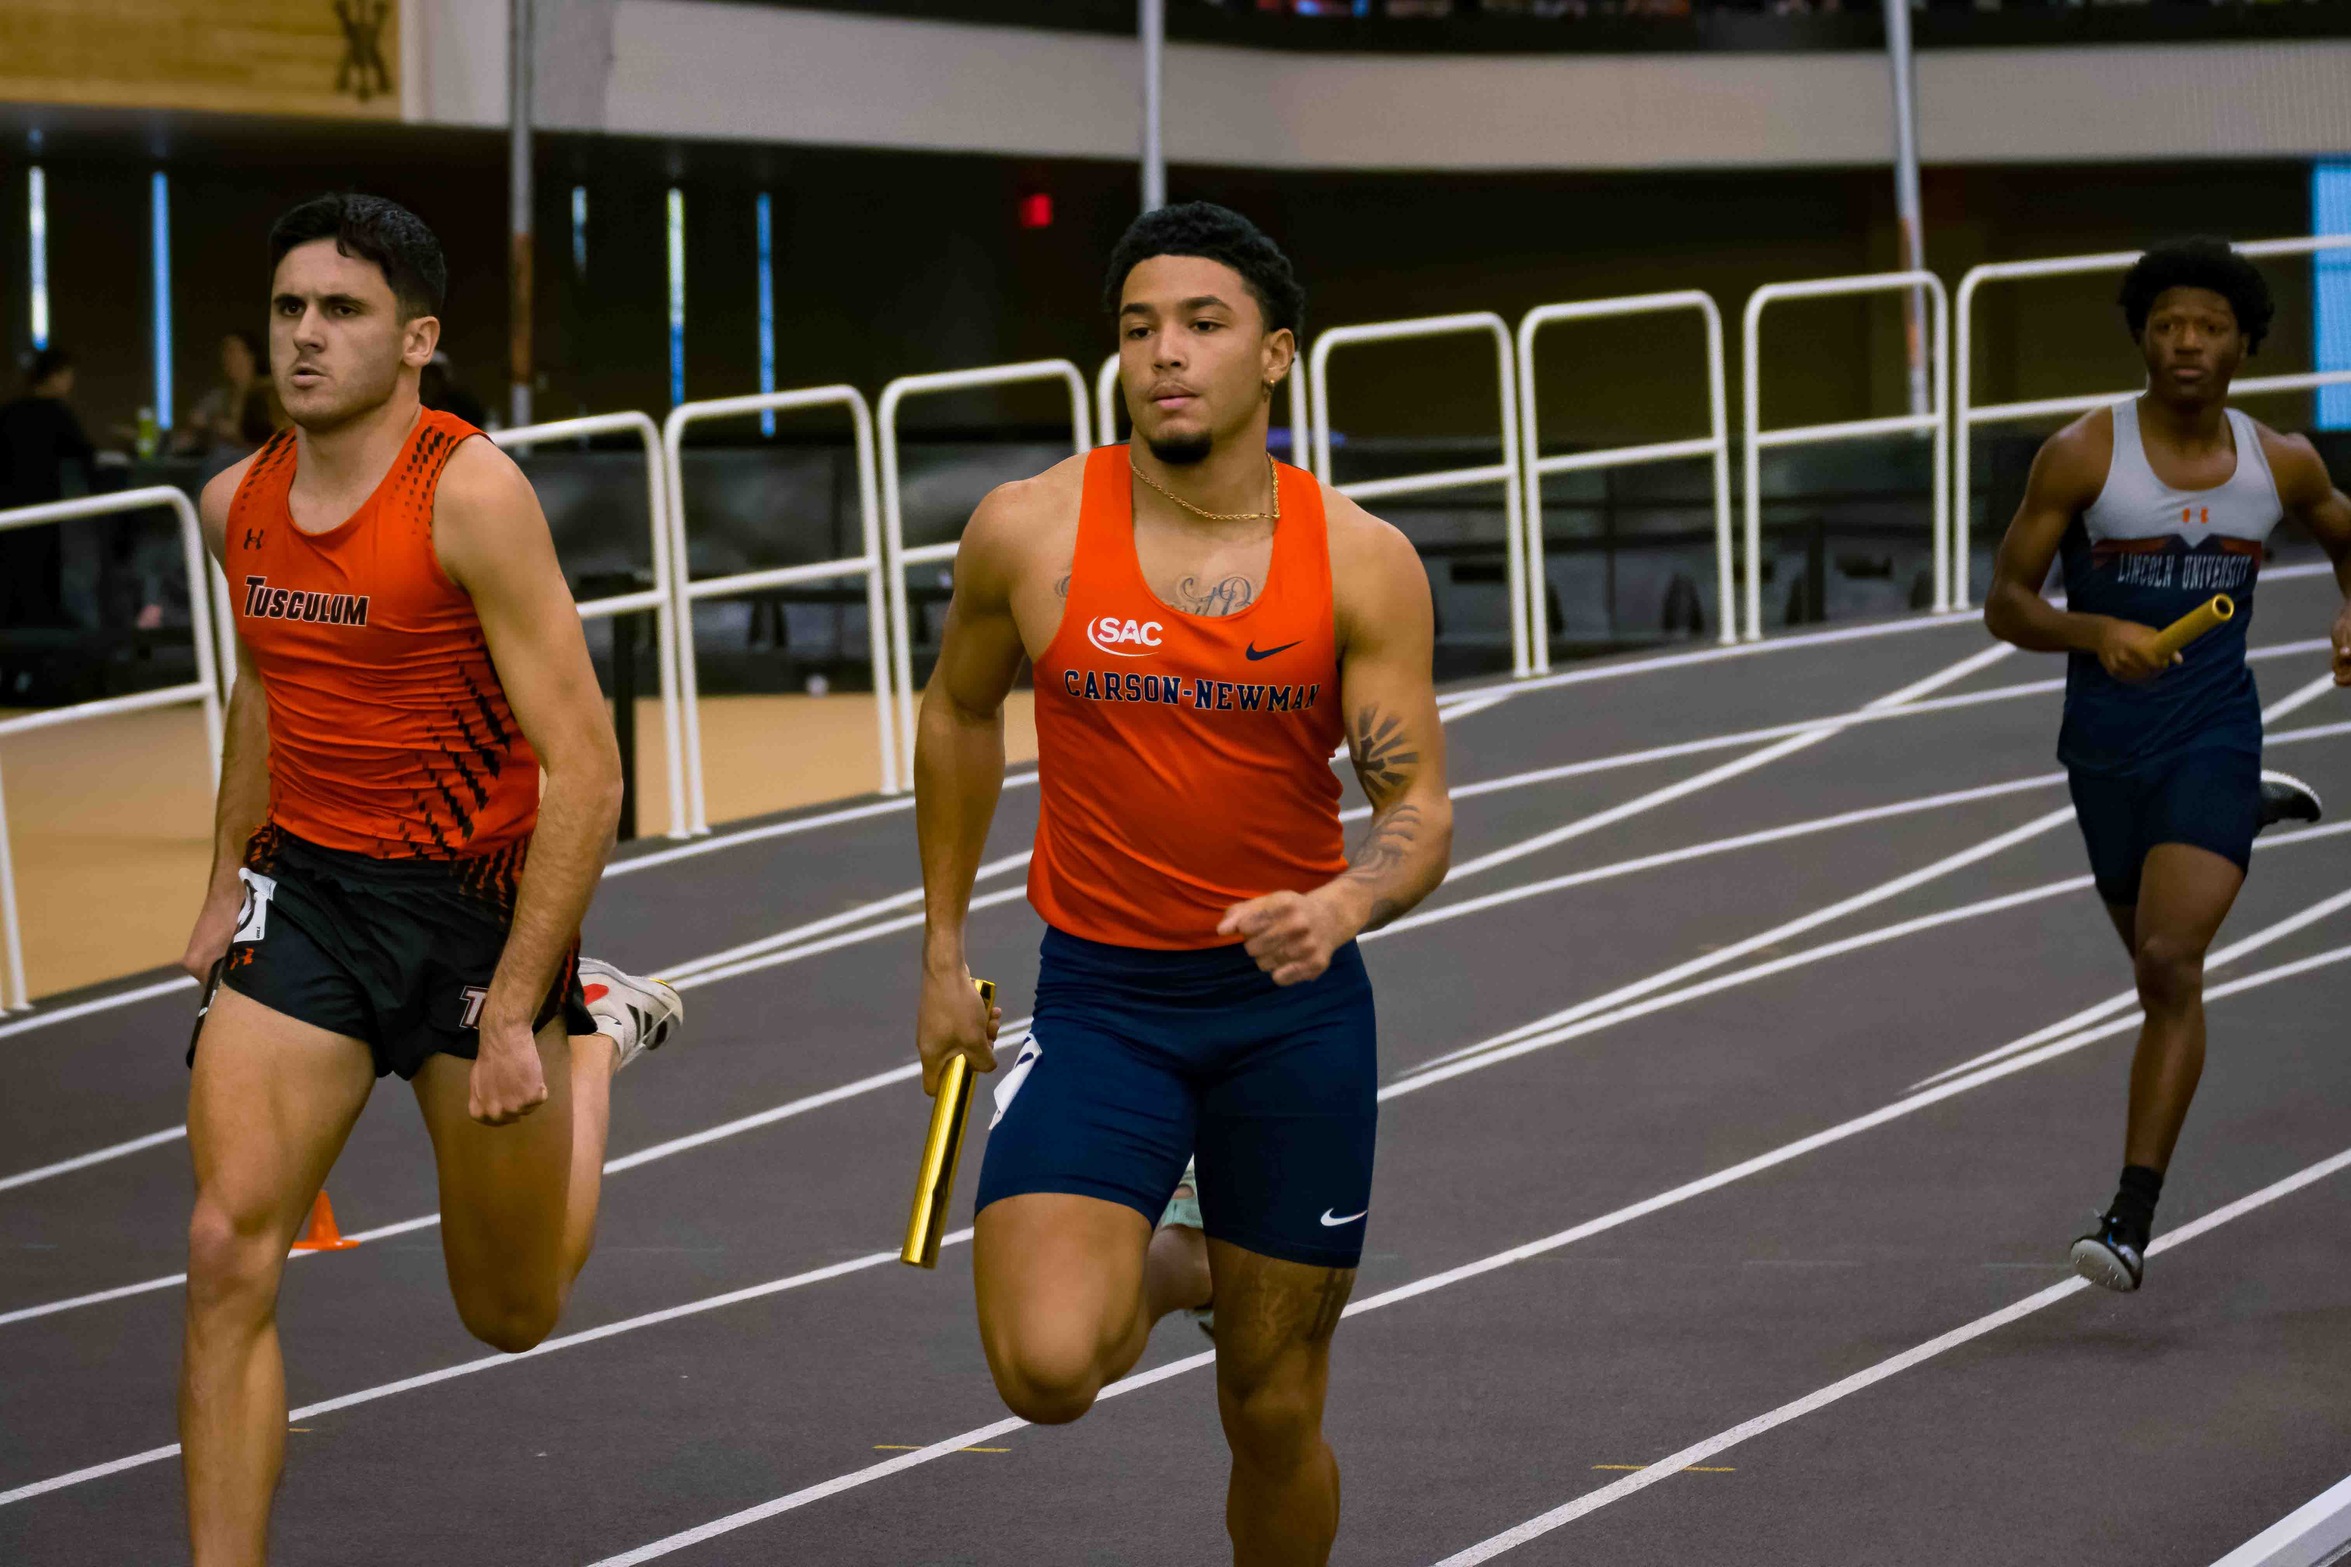 Personal records highlight the Eagles' first day at the Bast-Cregger Invitational